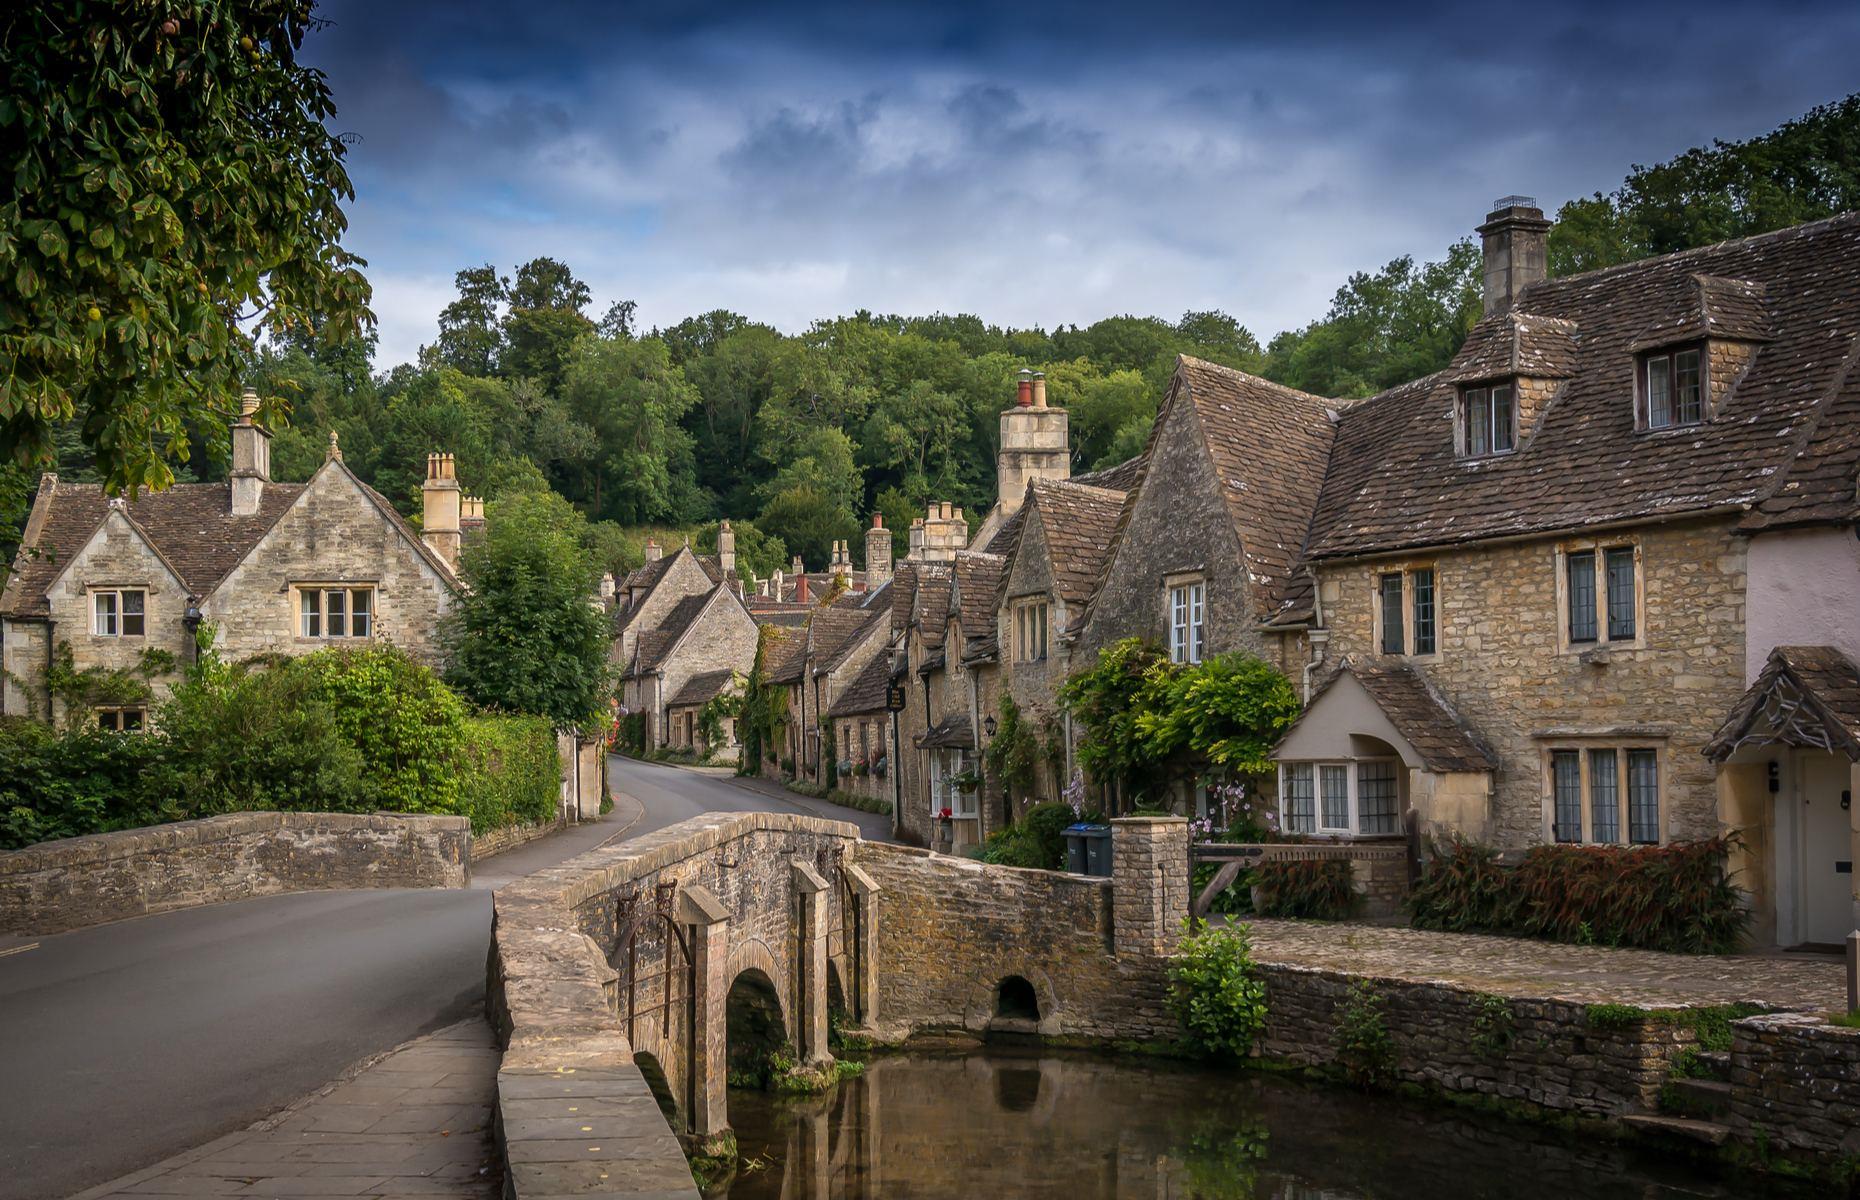 <p>With its characteristic <a href="https://www.loveexploring.com/guides/102636/guide-to-the-cotswolds">Cotswolds</a> stone buildings and winding countryside roads, it’s no wonder Castle Combe has often been called the prettiest village in England. The historic site was first settled by Celts in ancient times, before becoming a regional hub for the wool industry during the Middle Ages. Many of its landmarks, including a market cross, an old water pump and the Church of St. Andrew, were built during this period.</p>  <p><strong><a href="https://www.loveexploring.com/galleries/69165/the-uks-prettiest-small-towns-and-villages-2020?page=1">Take a look at more of the prettiest towns in the UK</a></strong></p>